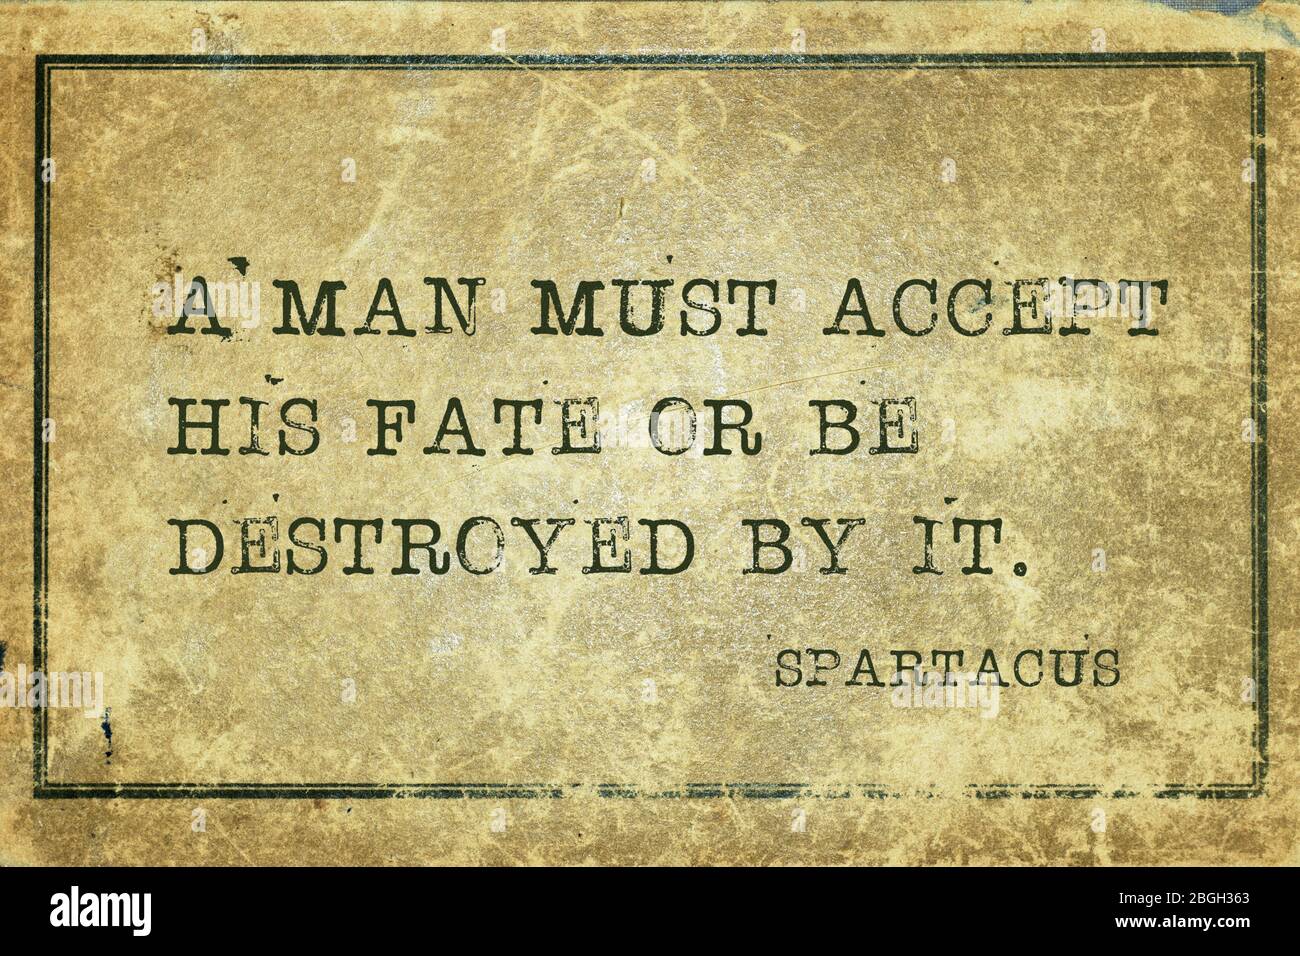 A man must accept his fate or be destroyed by it - ancient Roman gladiator and revolt leader Spartacus quote printed on grunge vintage cardboard Stock Photo